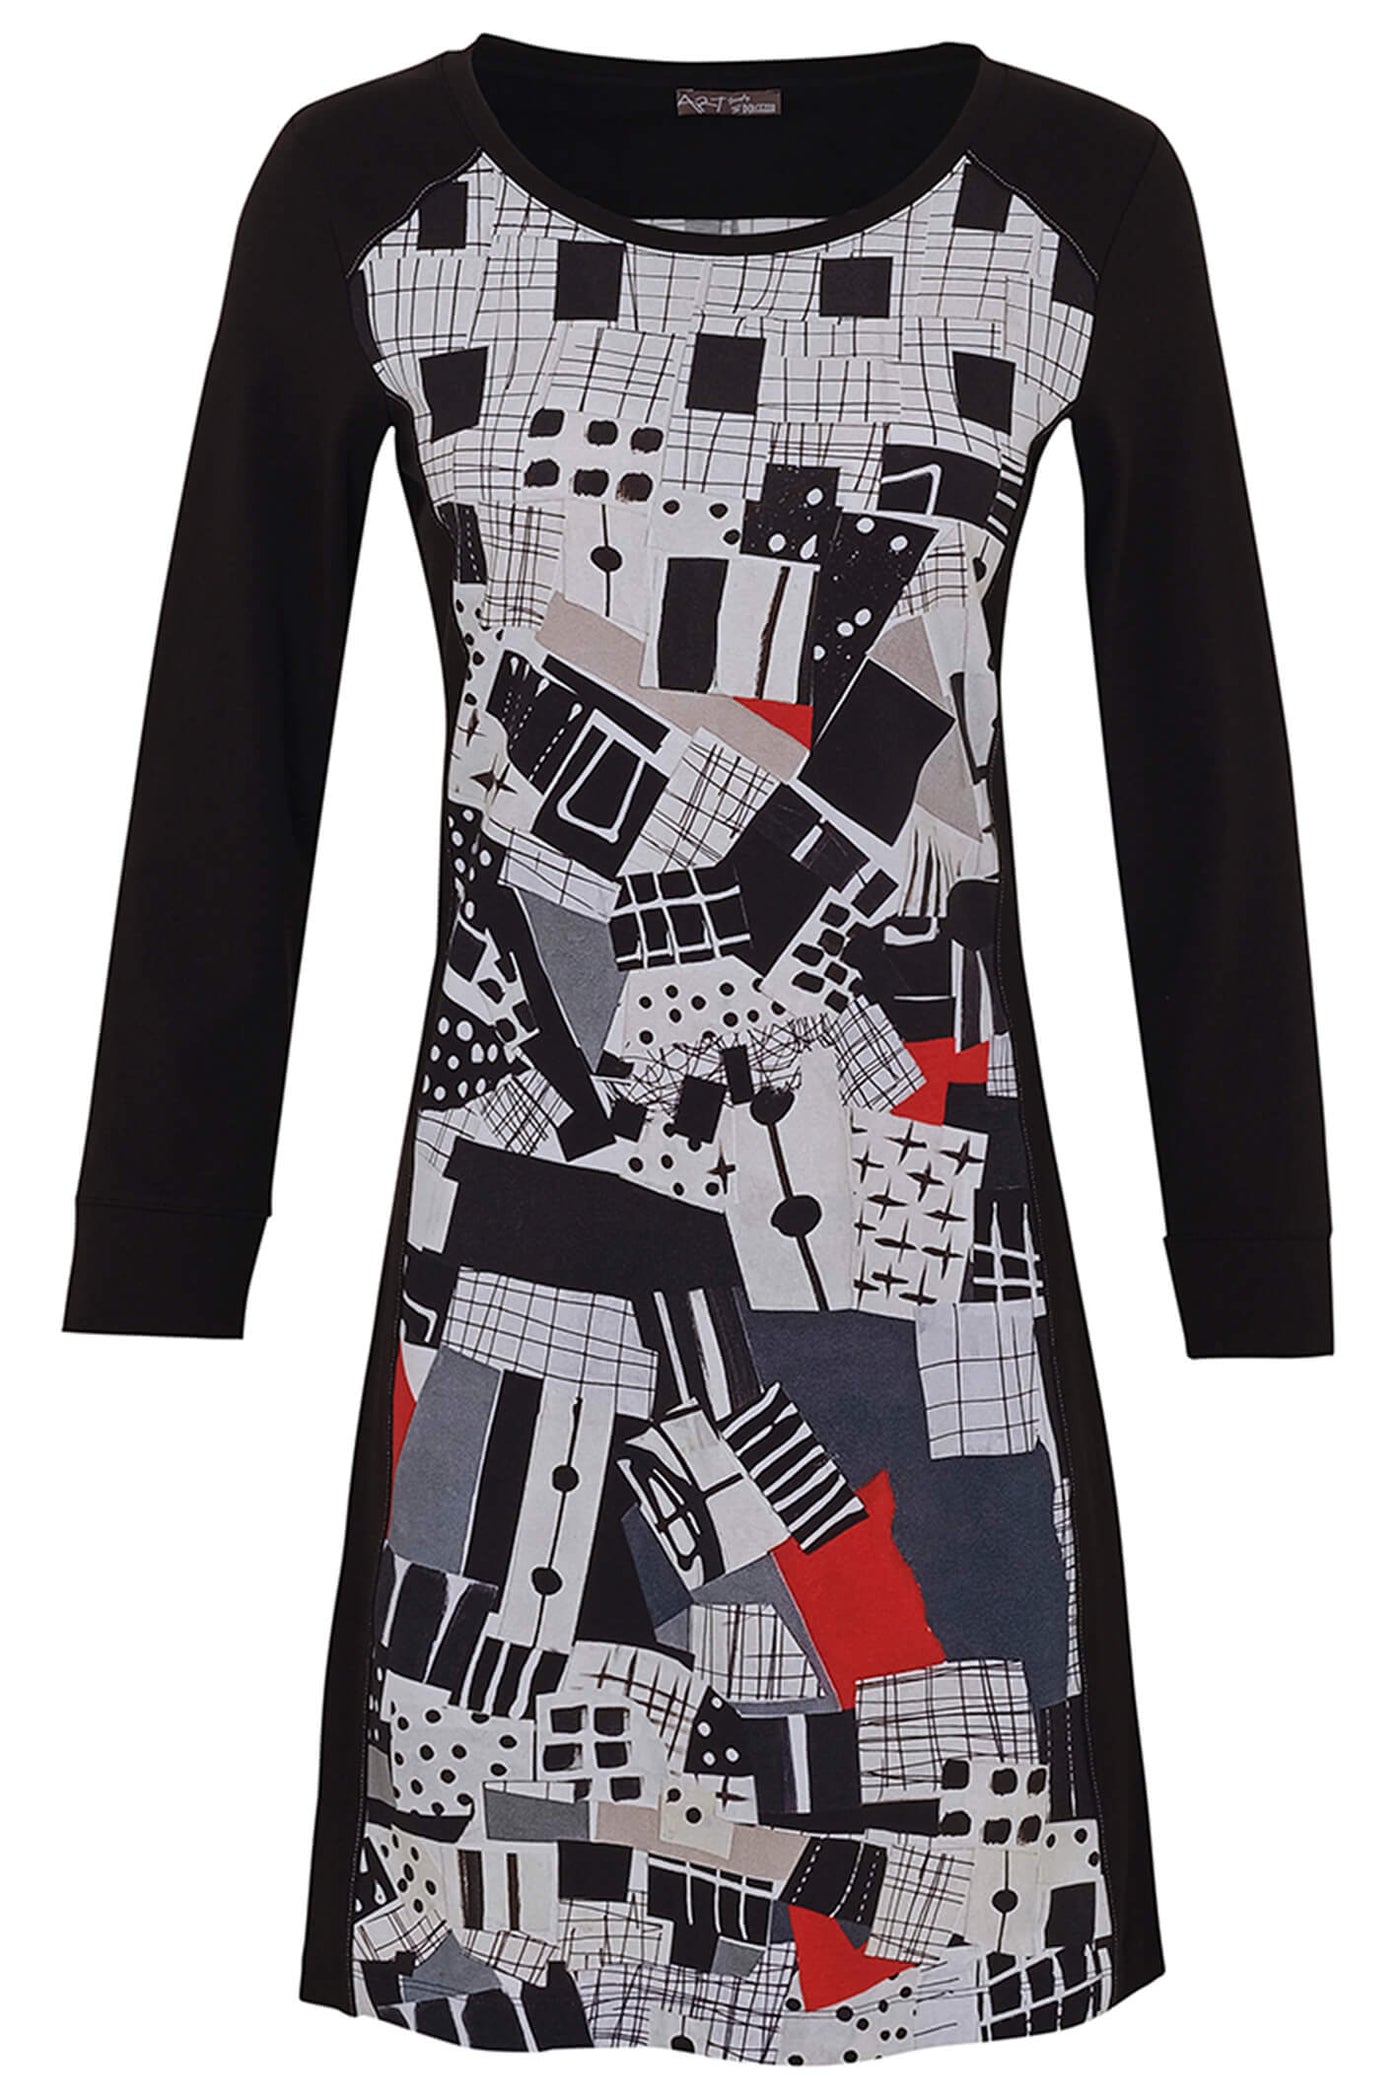 Dolcezza 73607 Black Tear Down The Wall Print Dress - Rouge Boutique